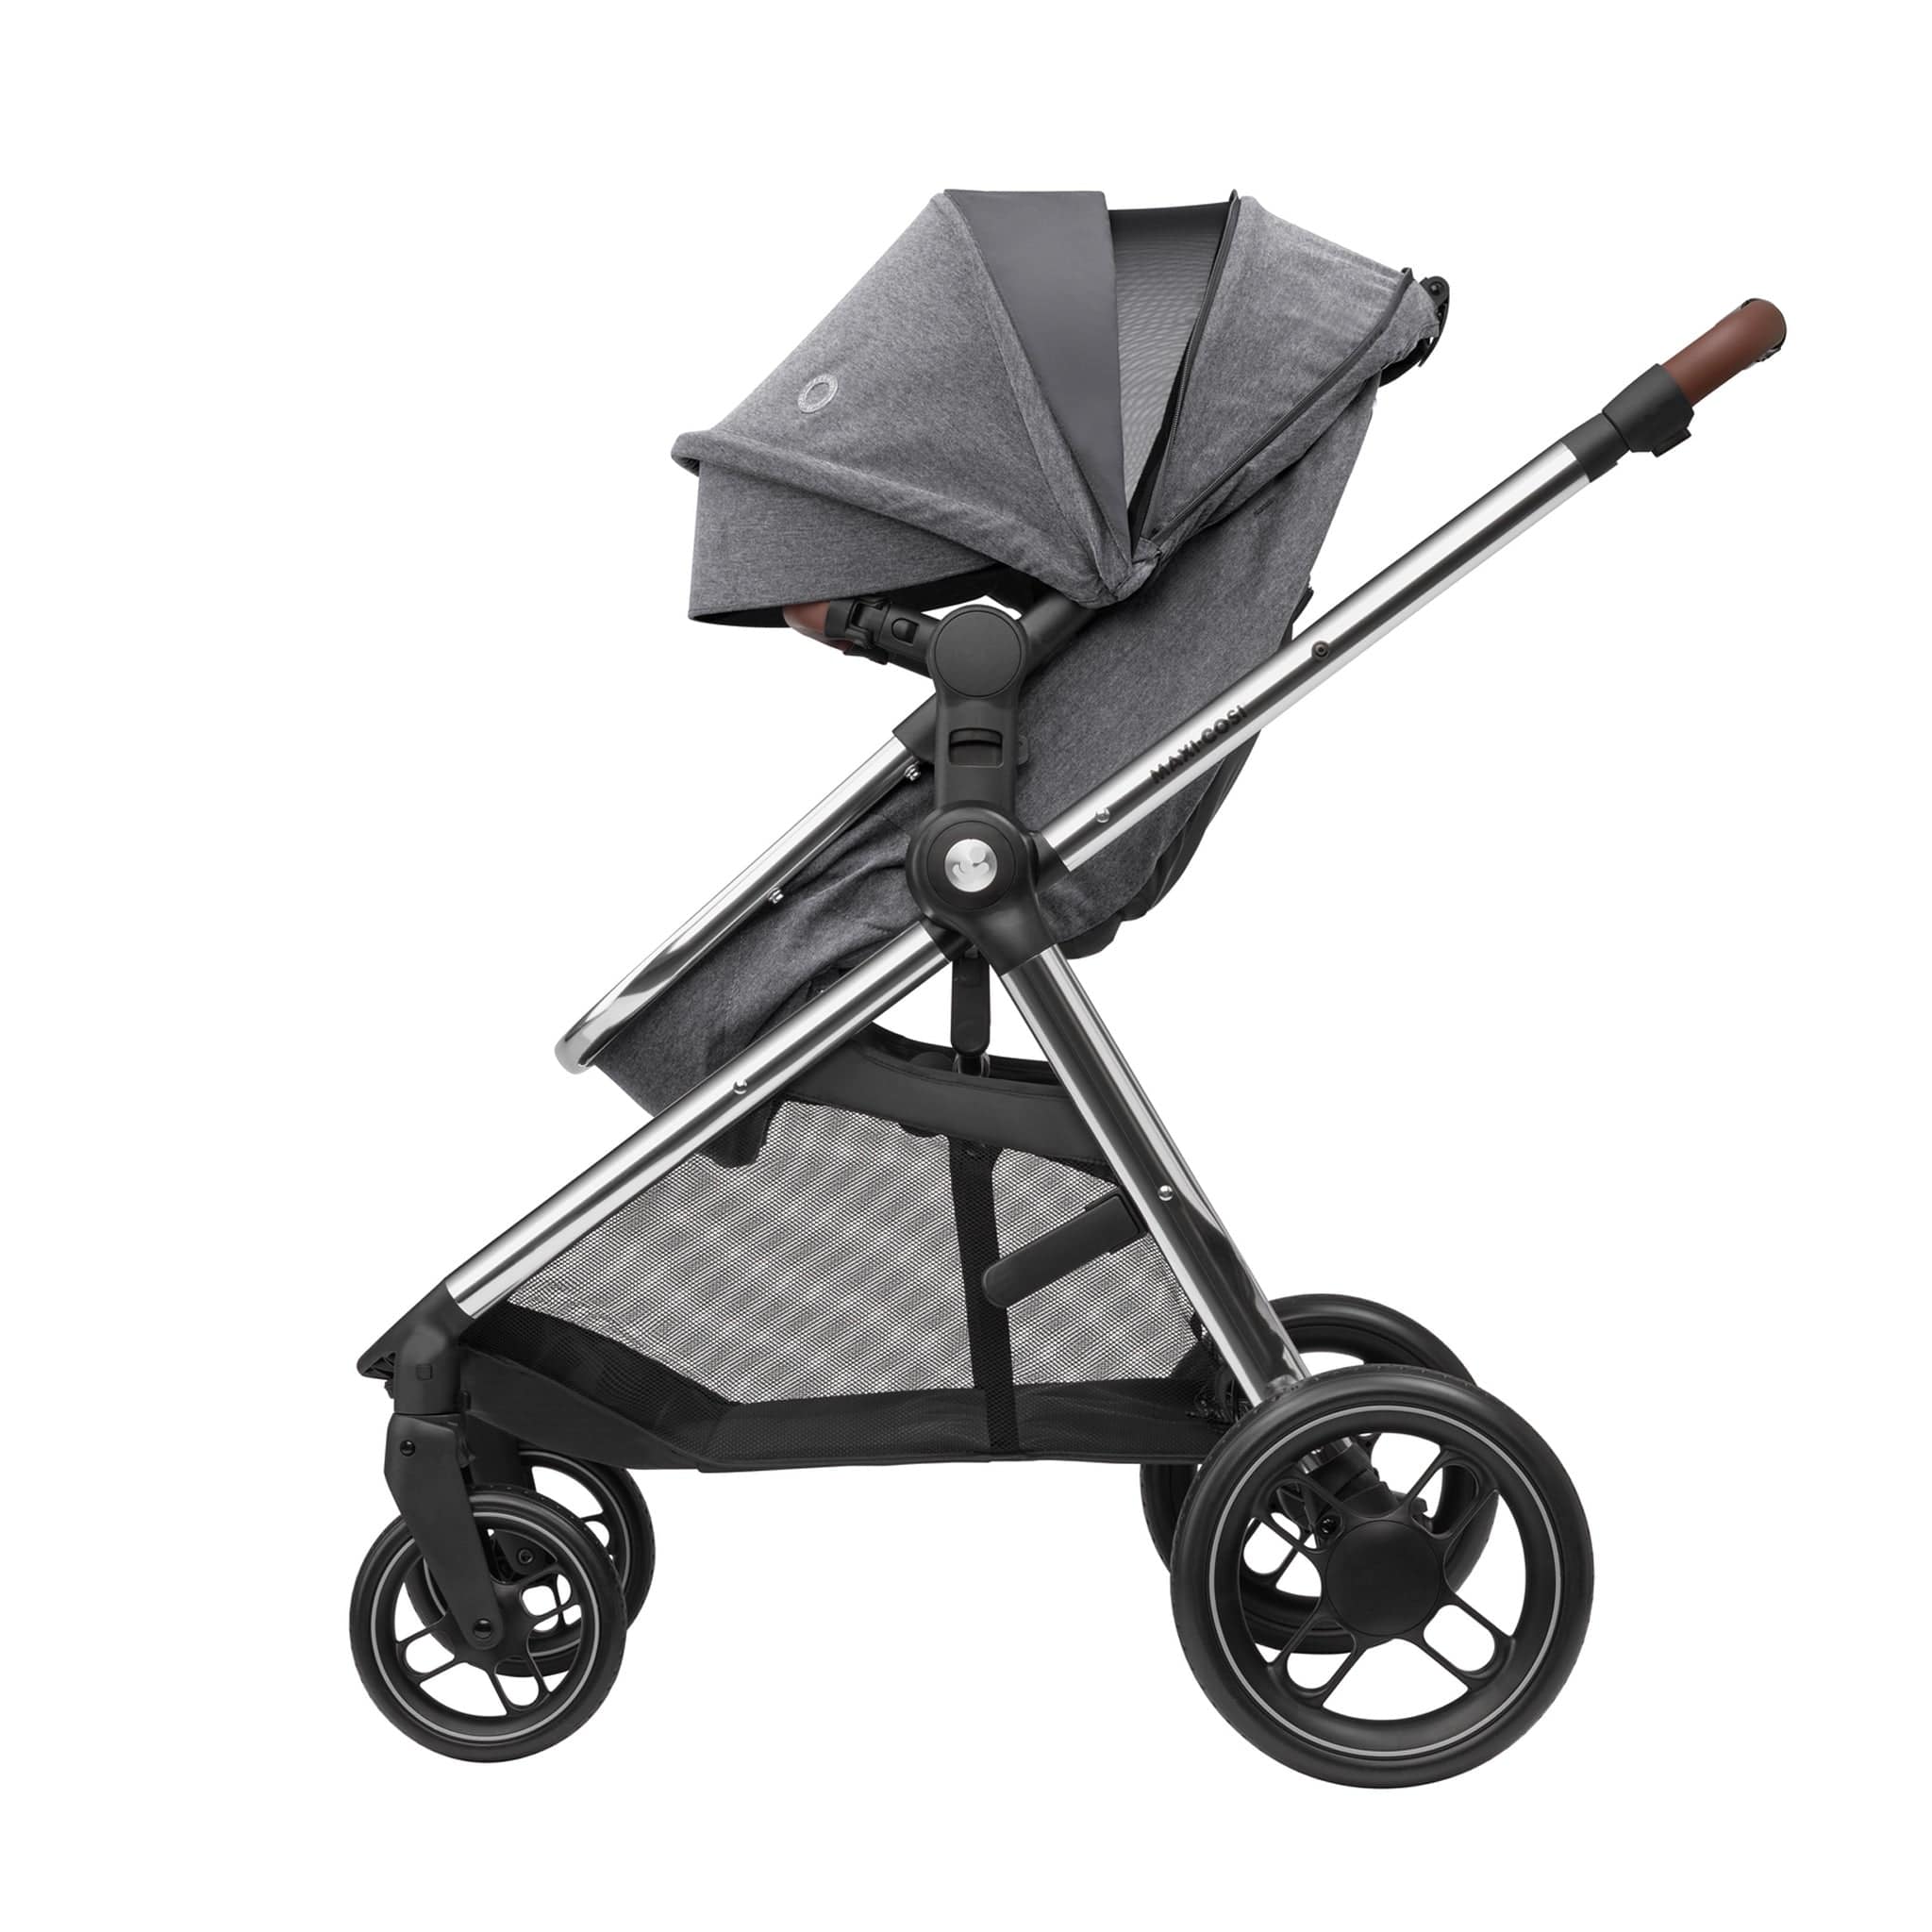 Maxi-Cosi travel systems Maxi-Cosi Zelia Luxe with Cabriofix i-Size Travel System in Twillic Grey 11075-TWI-GRY